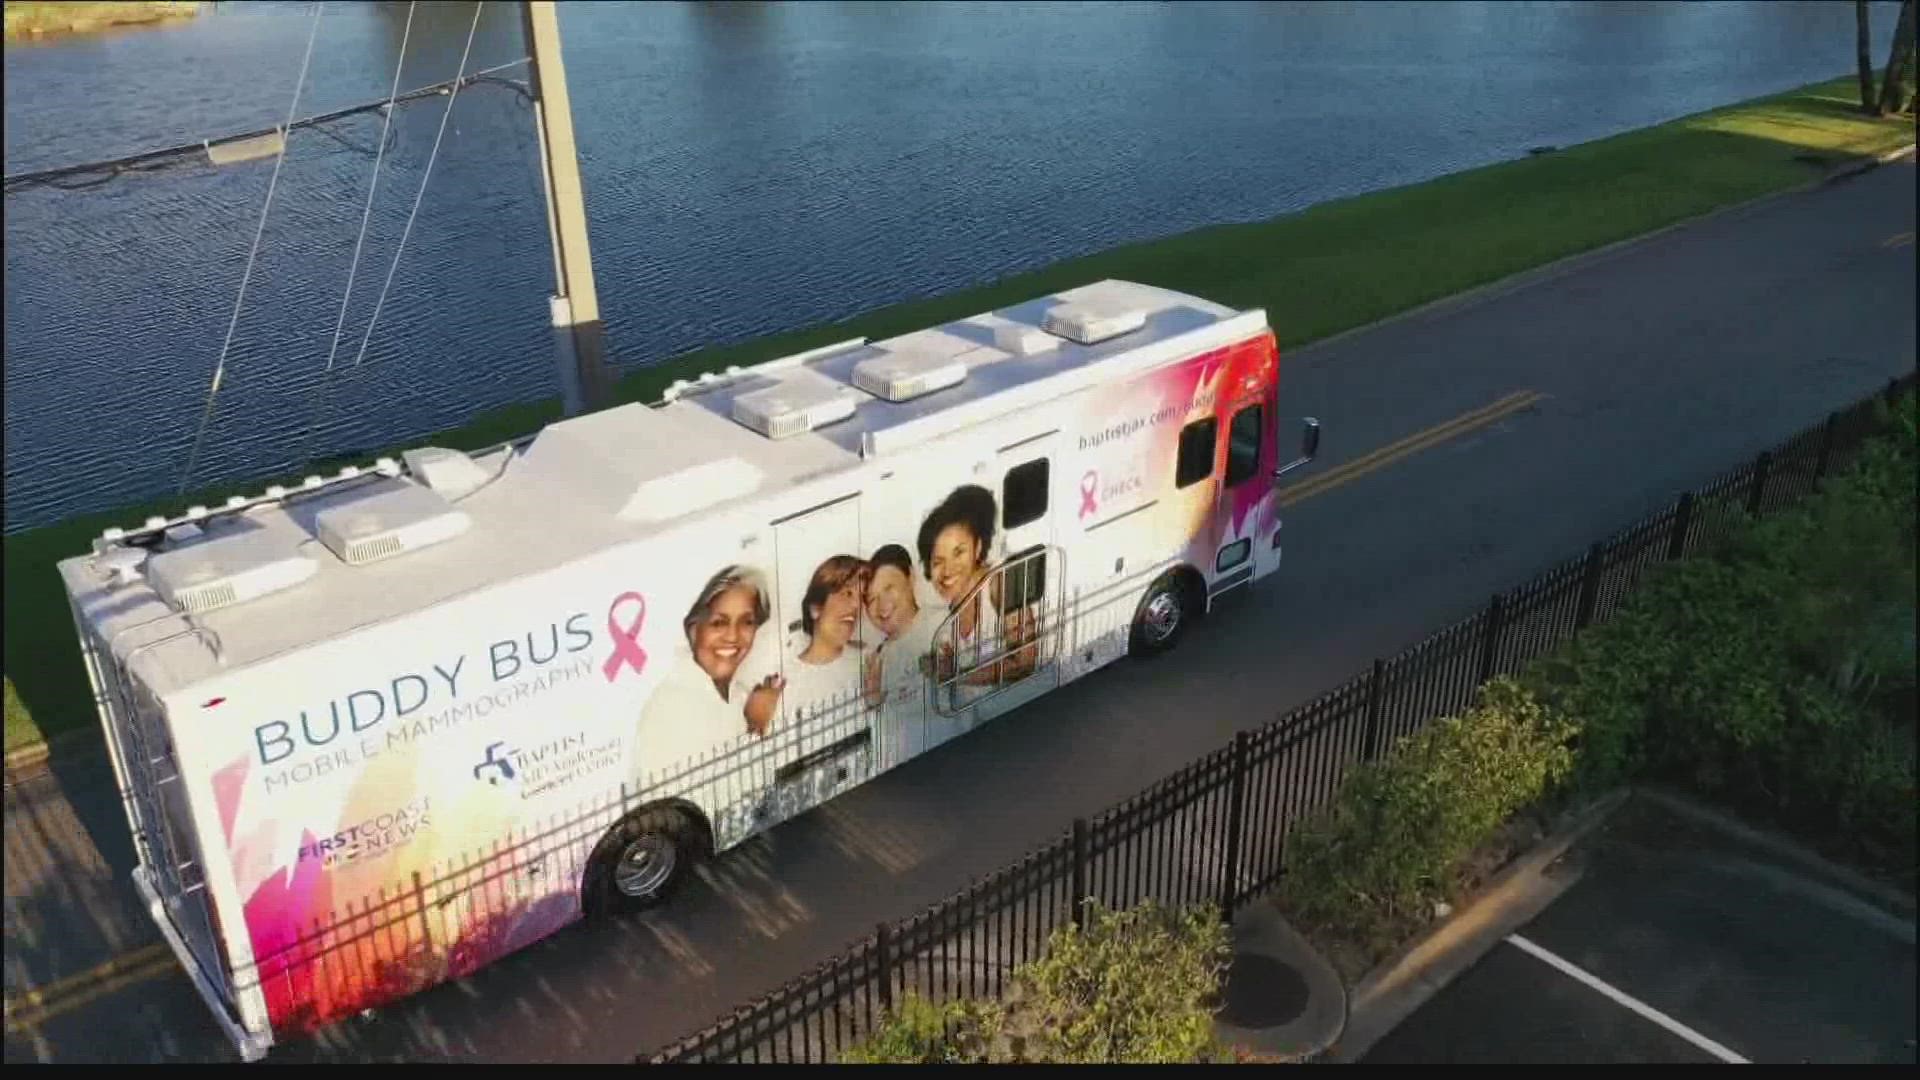 Meet the first women to "get squished" onboard the Buddy Bus!